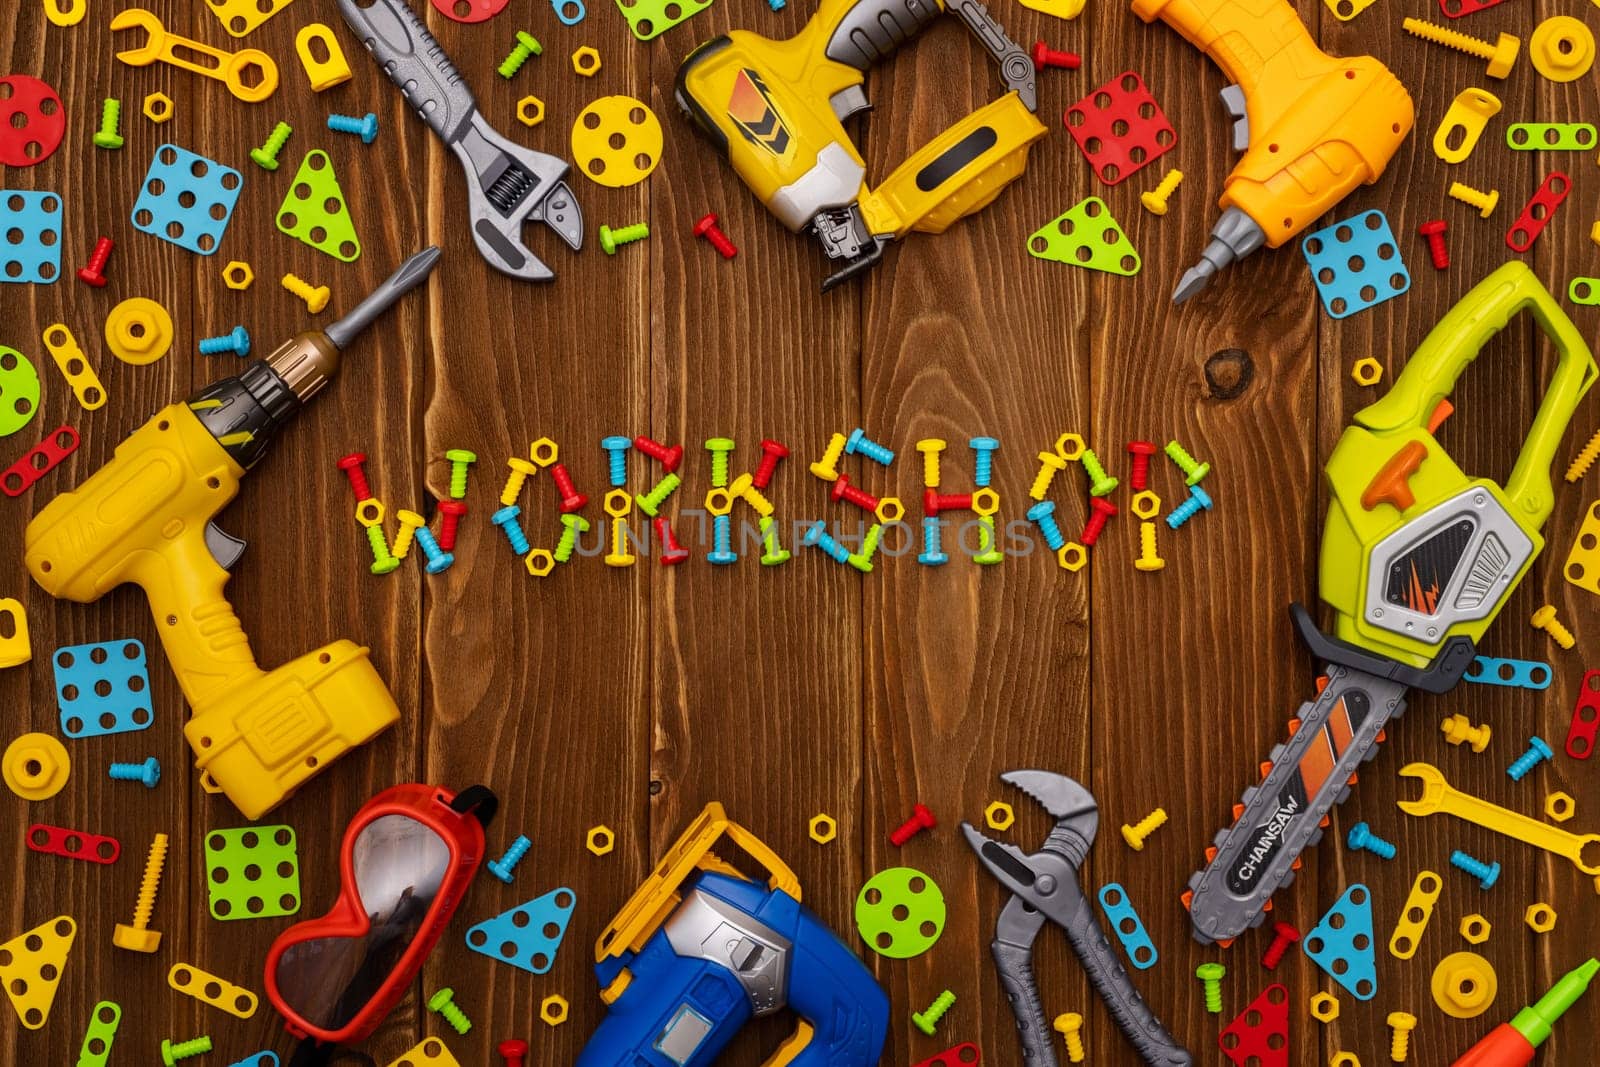 Colorful toy tools, bolts and nuts as frame with text WORKSHOP on wooden background. Top view. Flat lay